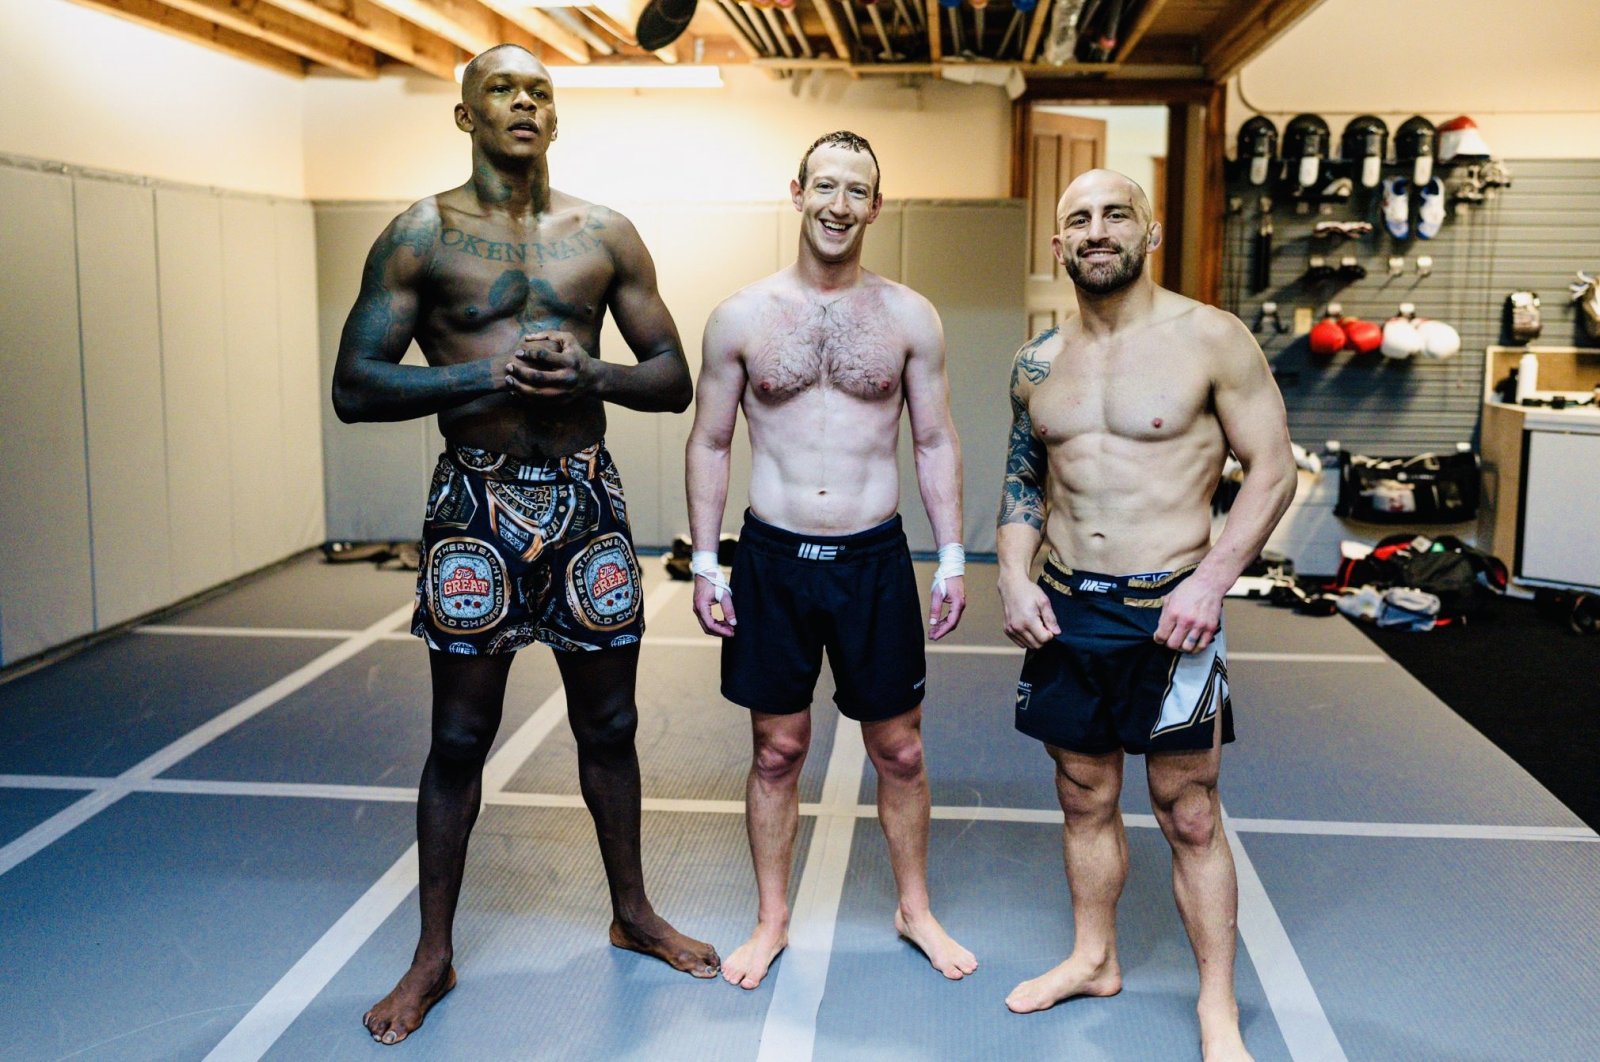 Mark Zuckerberg (C) poses with Israel Adesanya (L) and Alexander Volkanovski after training for the UFC in this undated photo. (Zuck on Instagram)